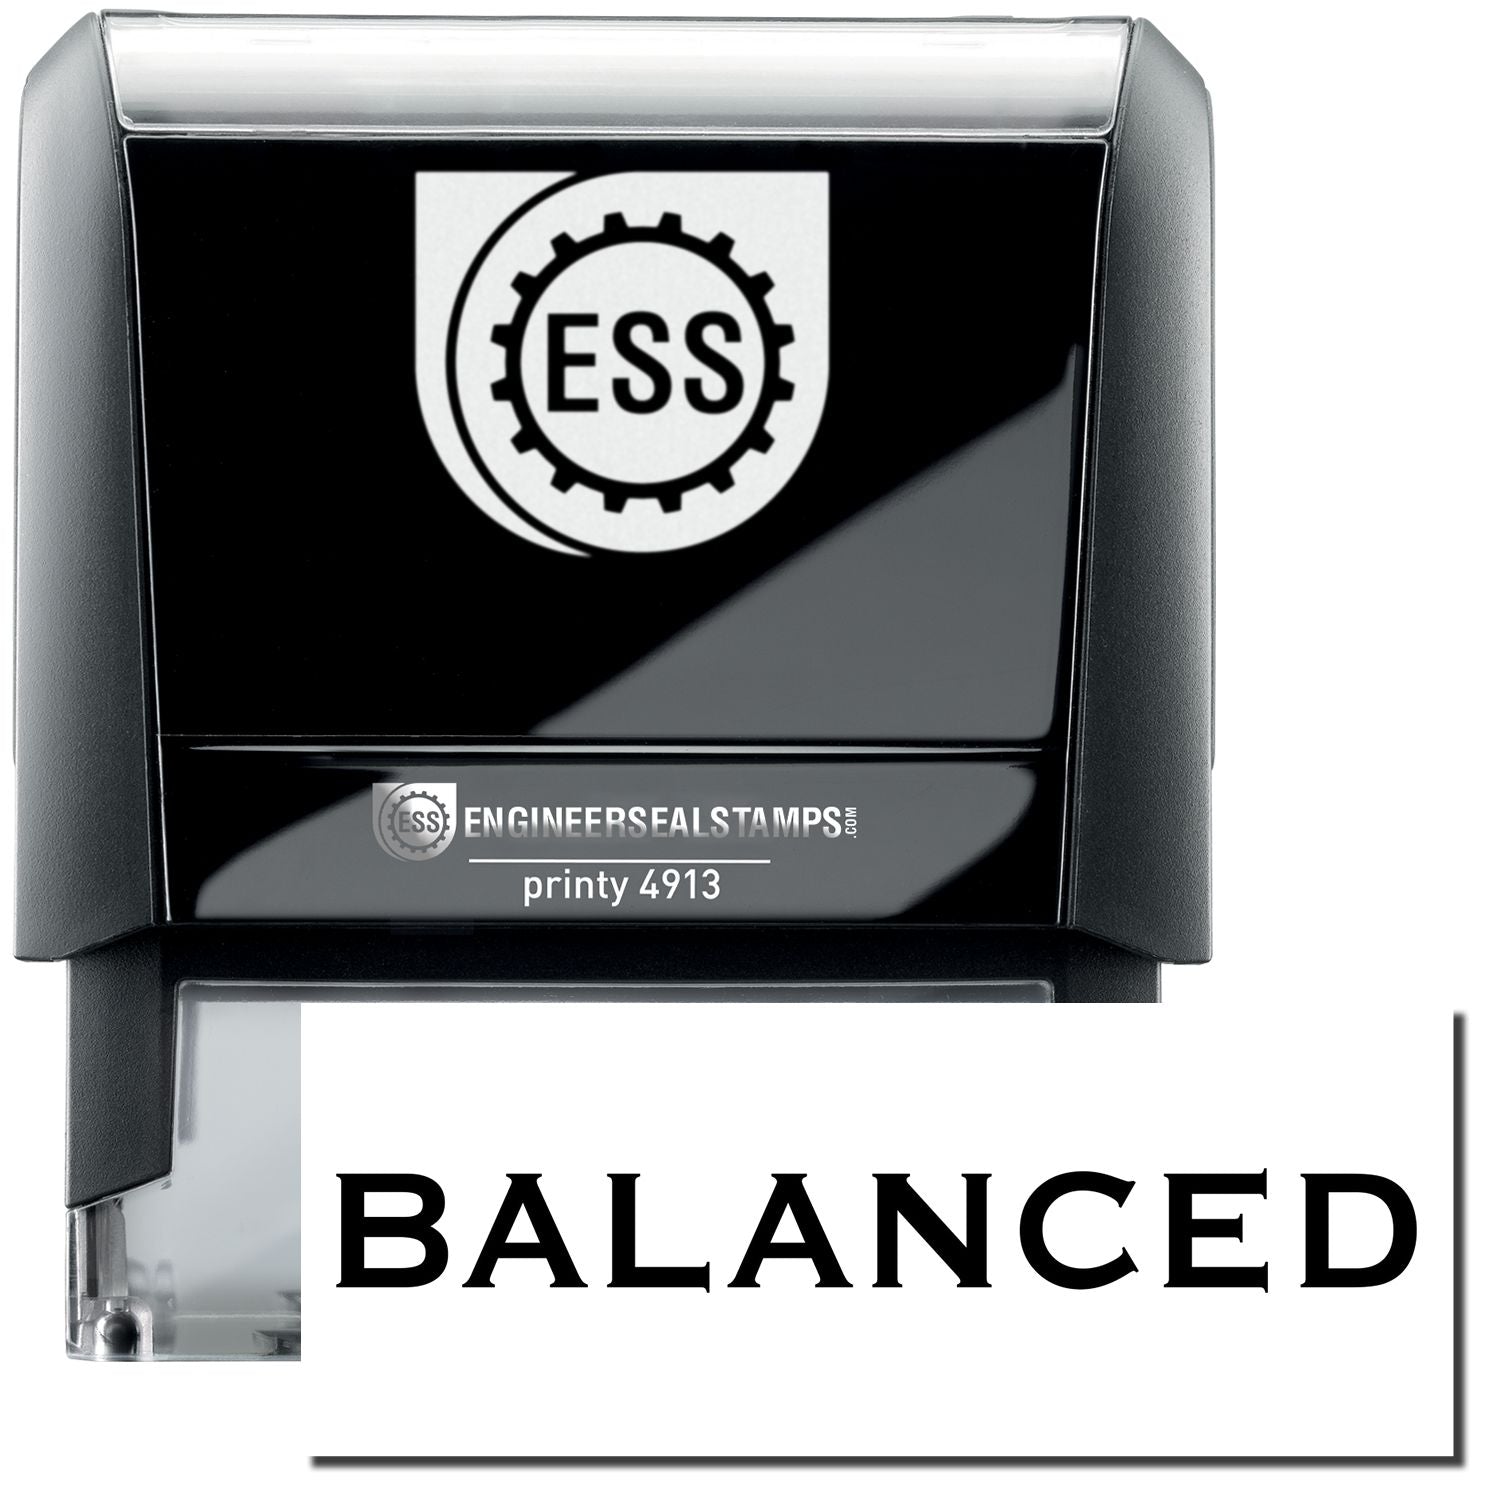 A self-inking stamp with a stamped image showing how the text "BALANCED" in a large bold font is displayed by it.